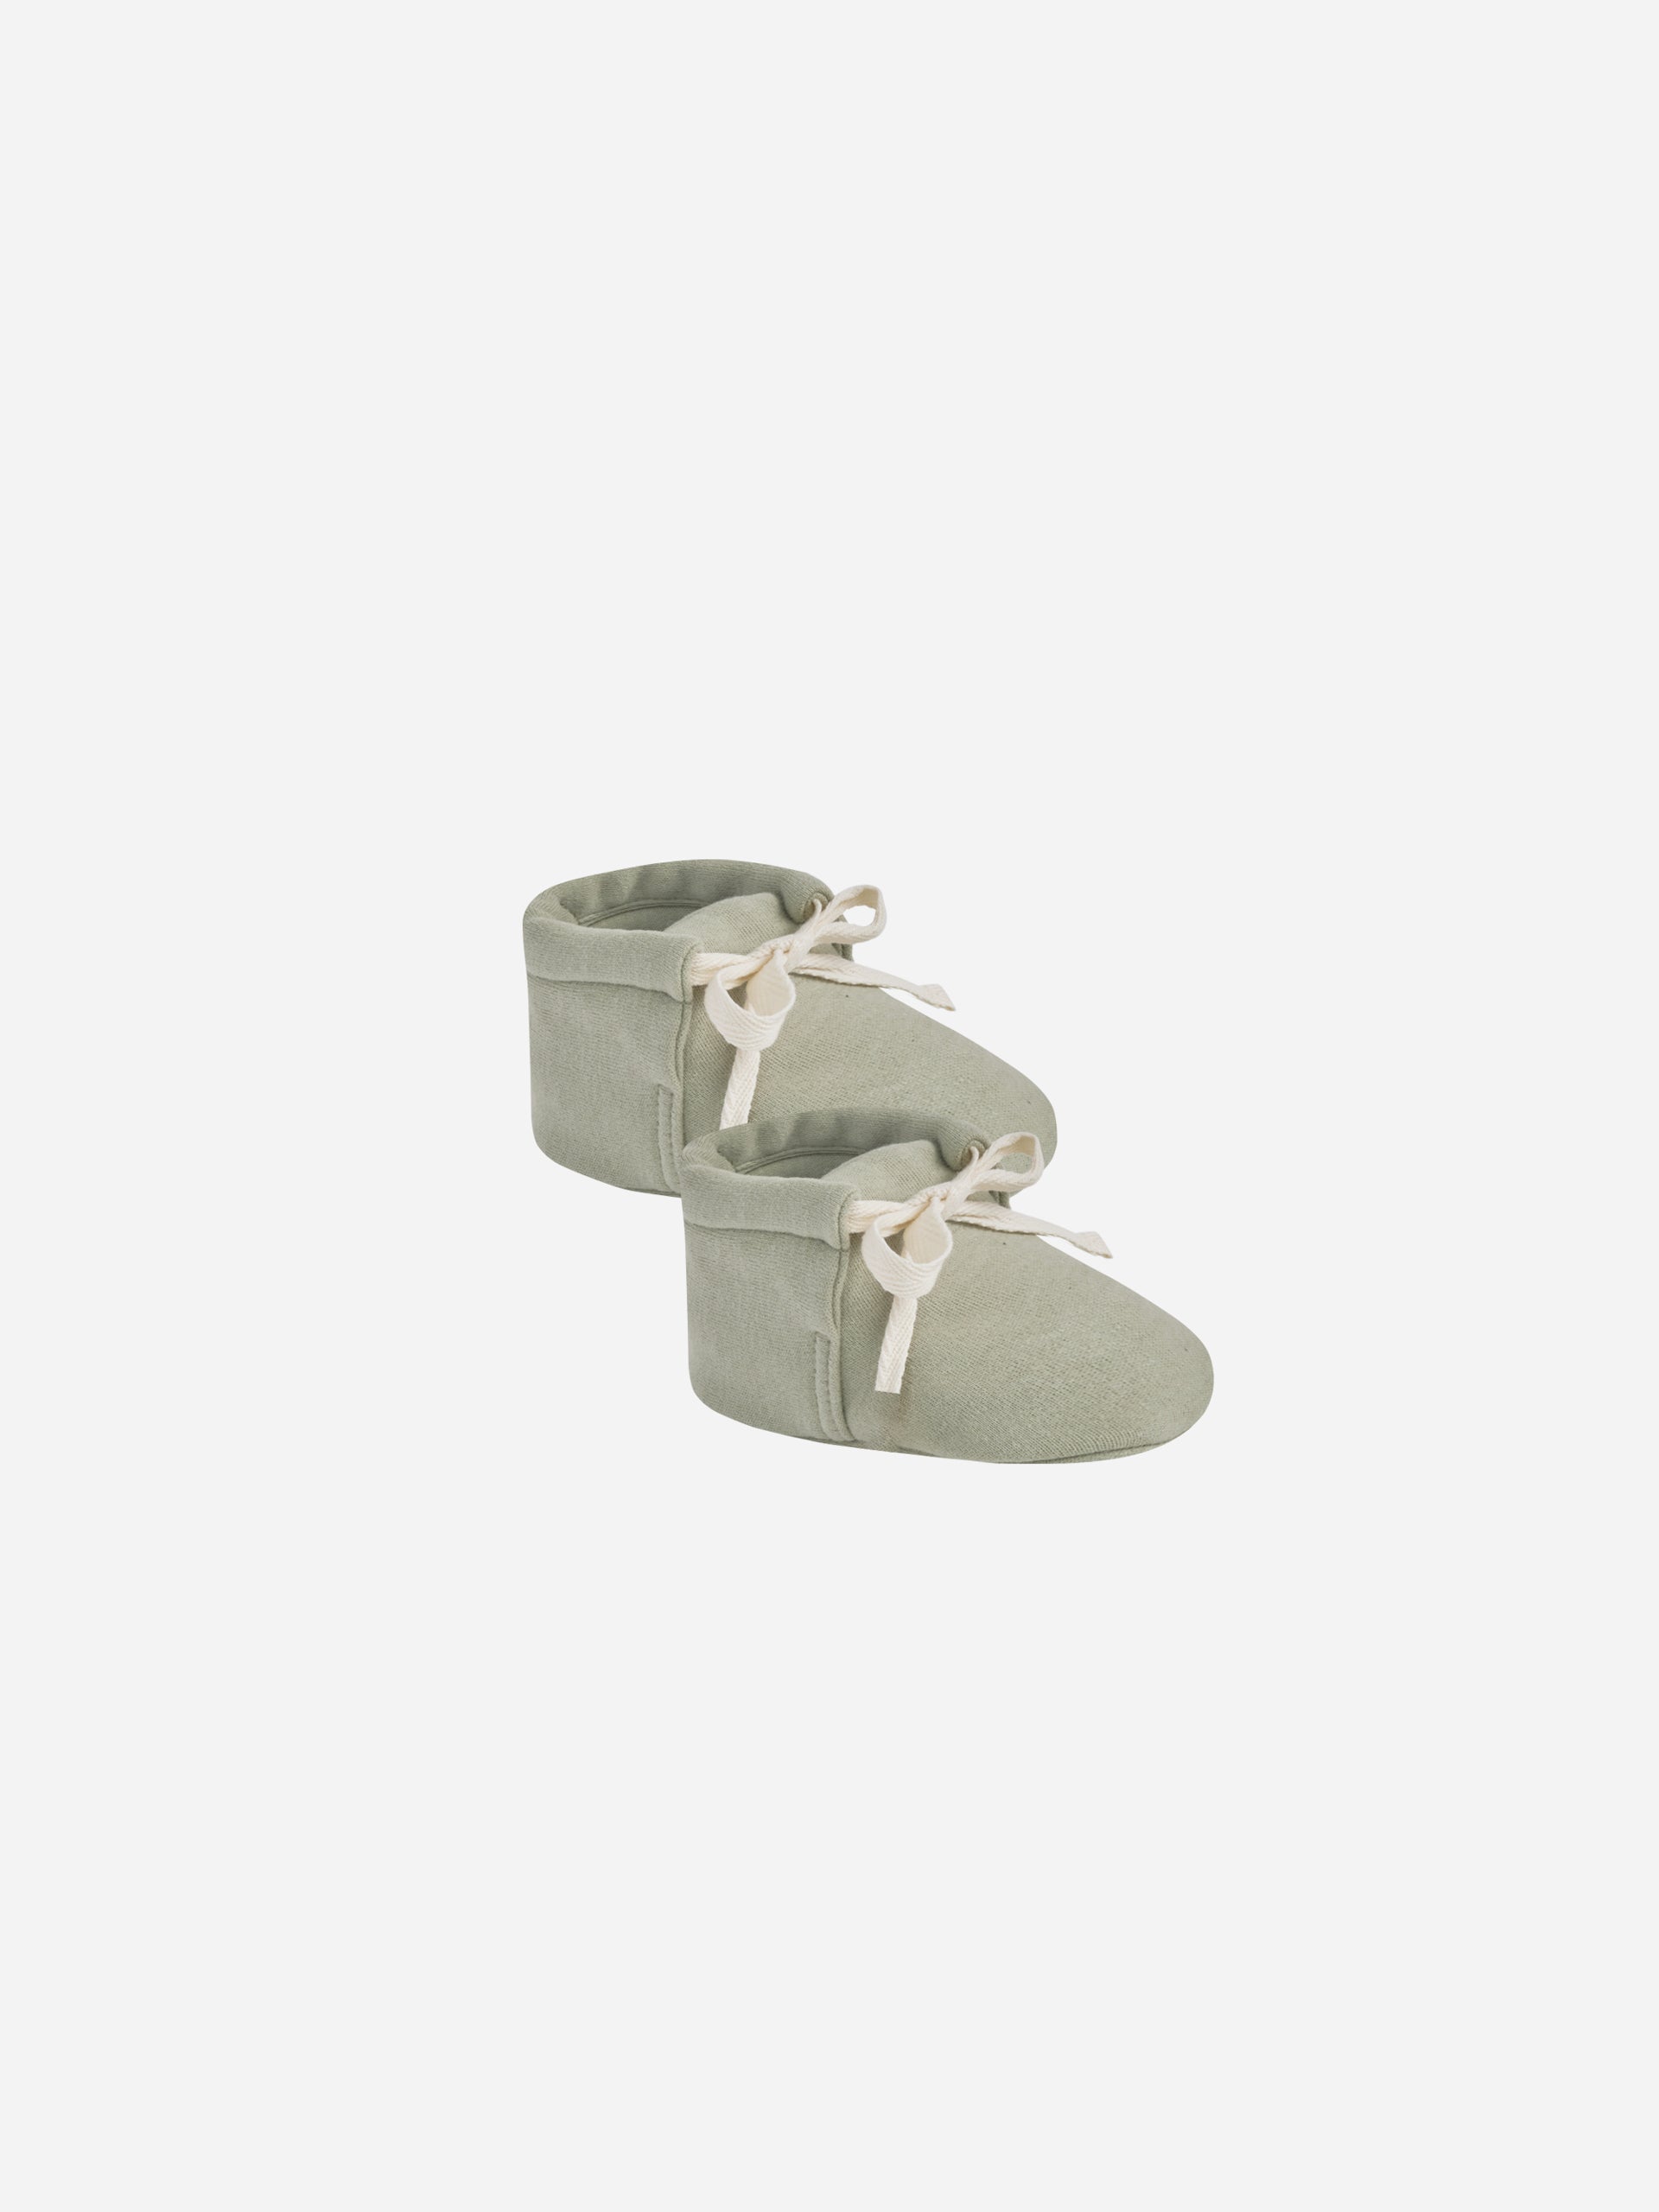 Baby Booties || Sage - Rylee + Cru | Kids Clothes | Trendy Baby Clothes | Modern Infant Outfits |